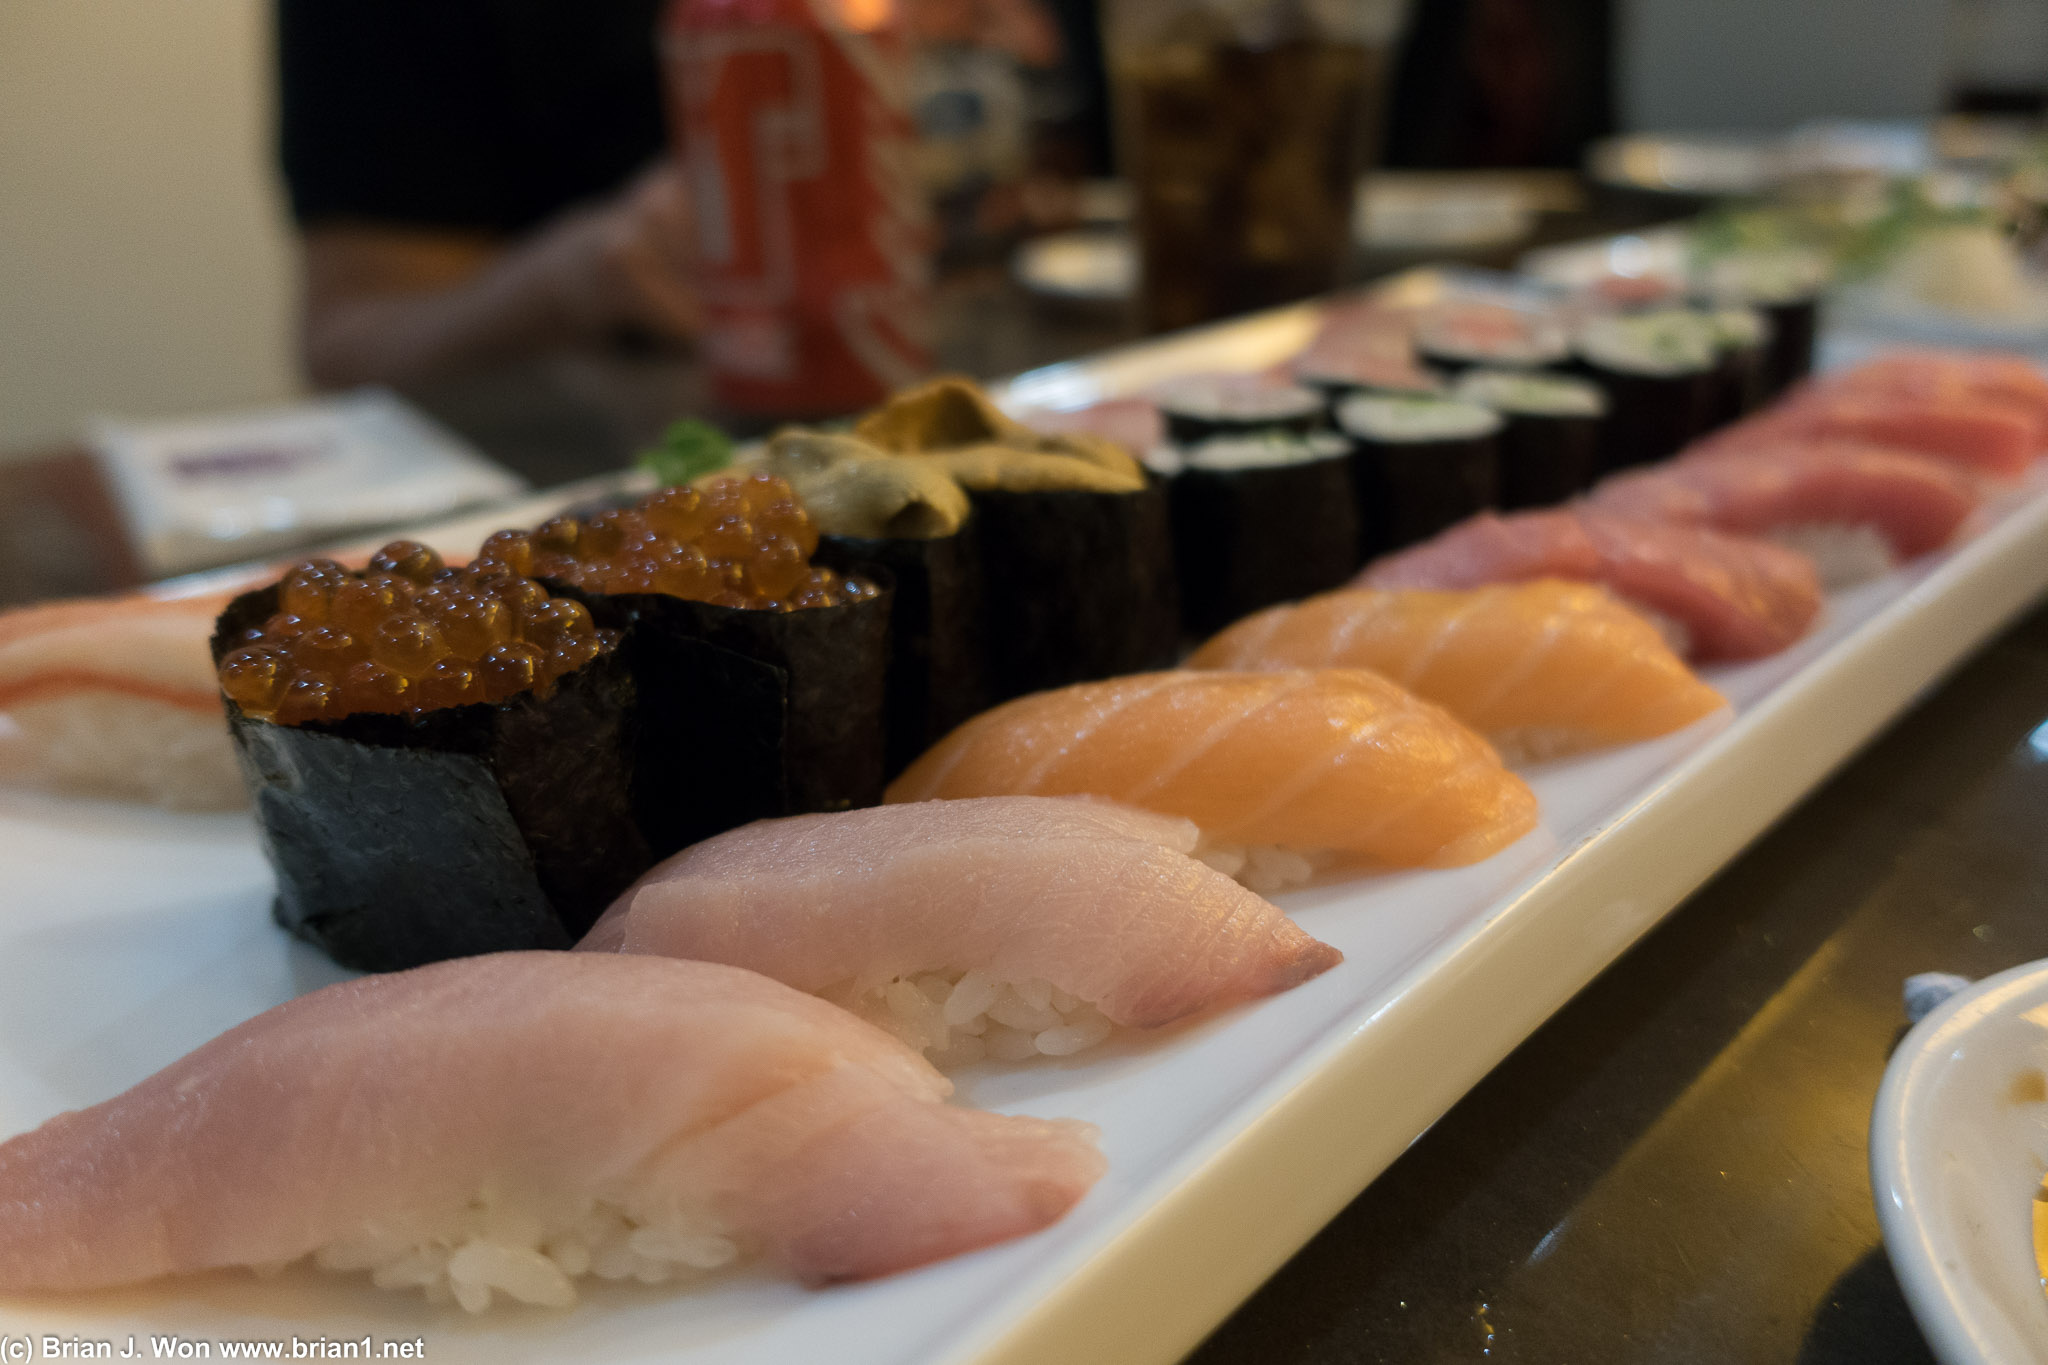 Sushi was good too, but not as good as the sashimi.